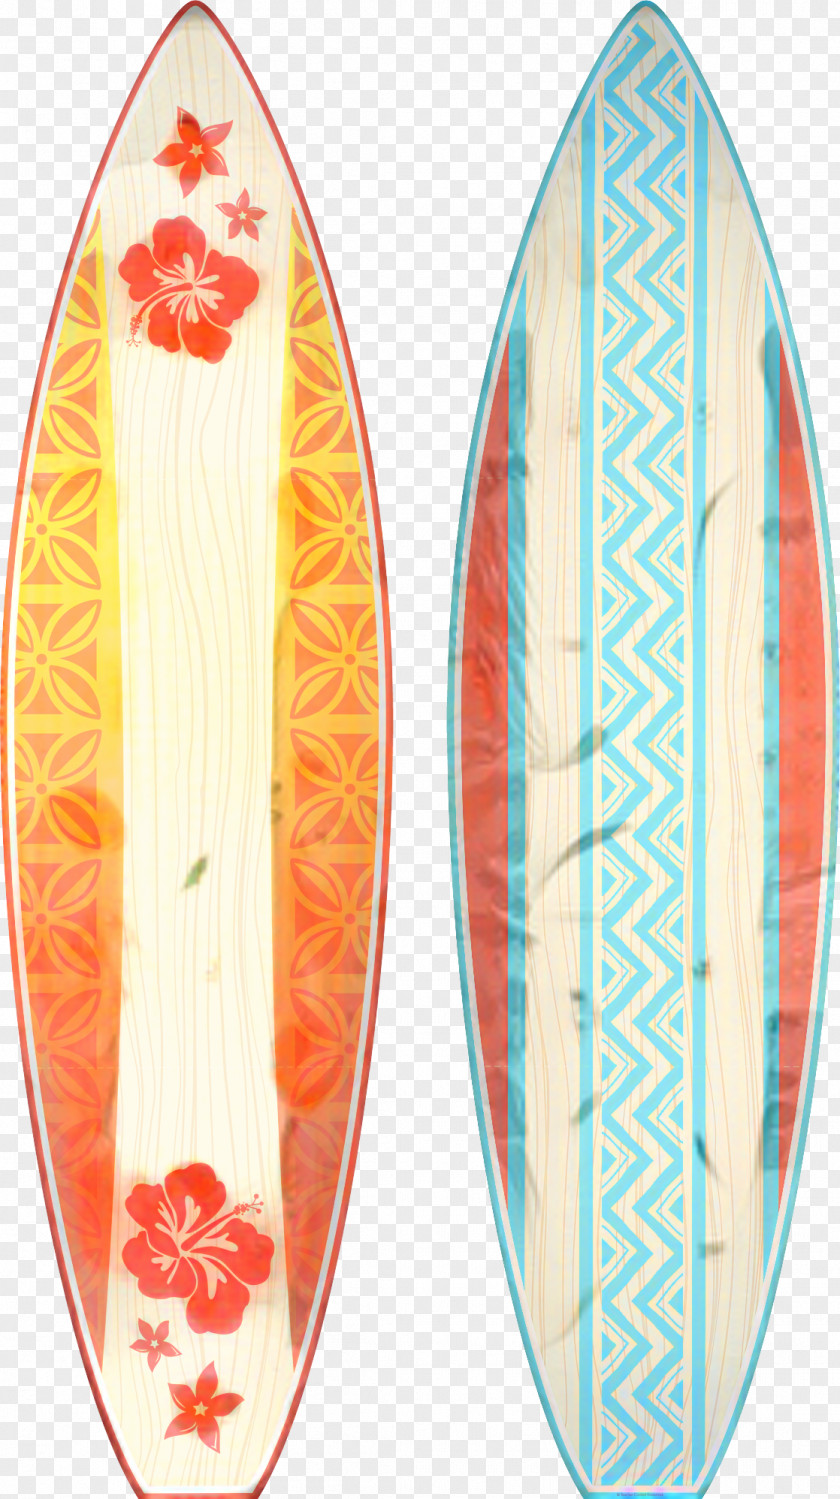 Surfboard Image World Teacher Created Surfing PNG